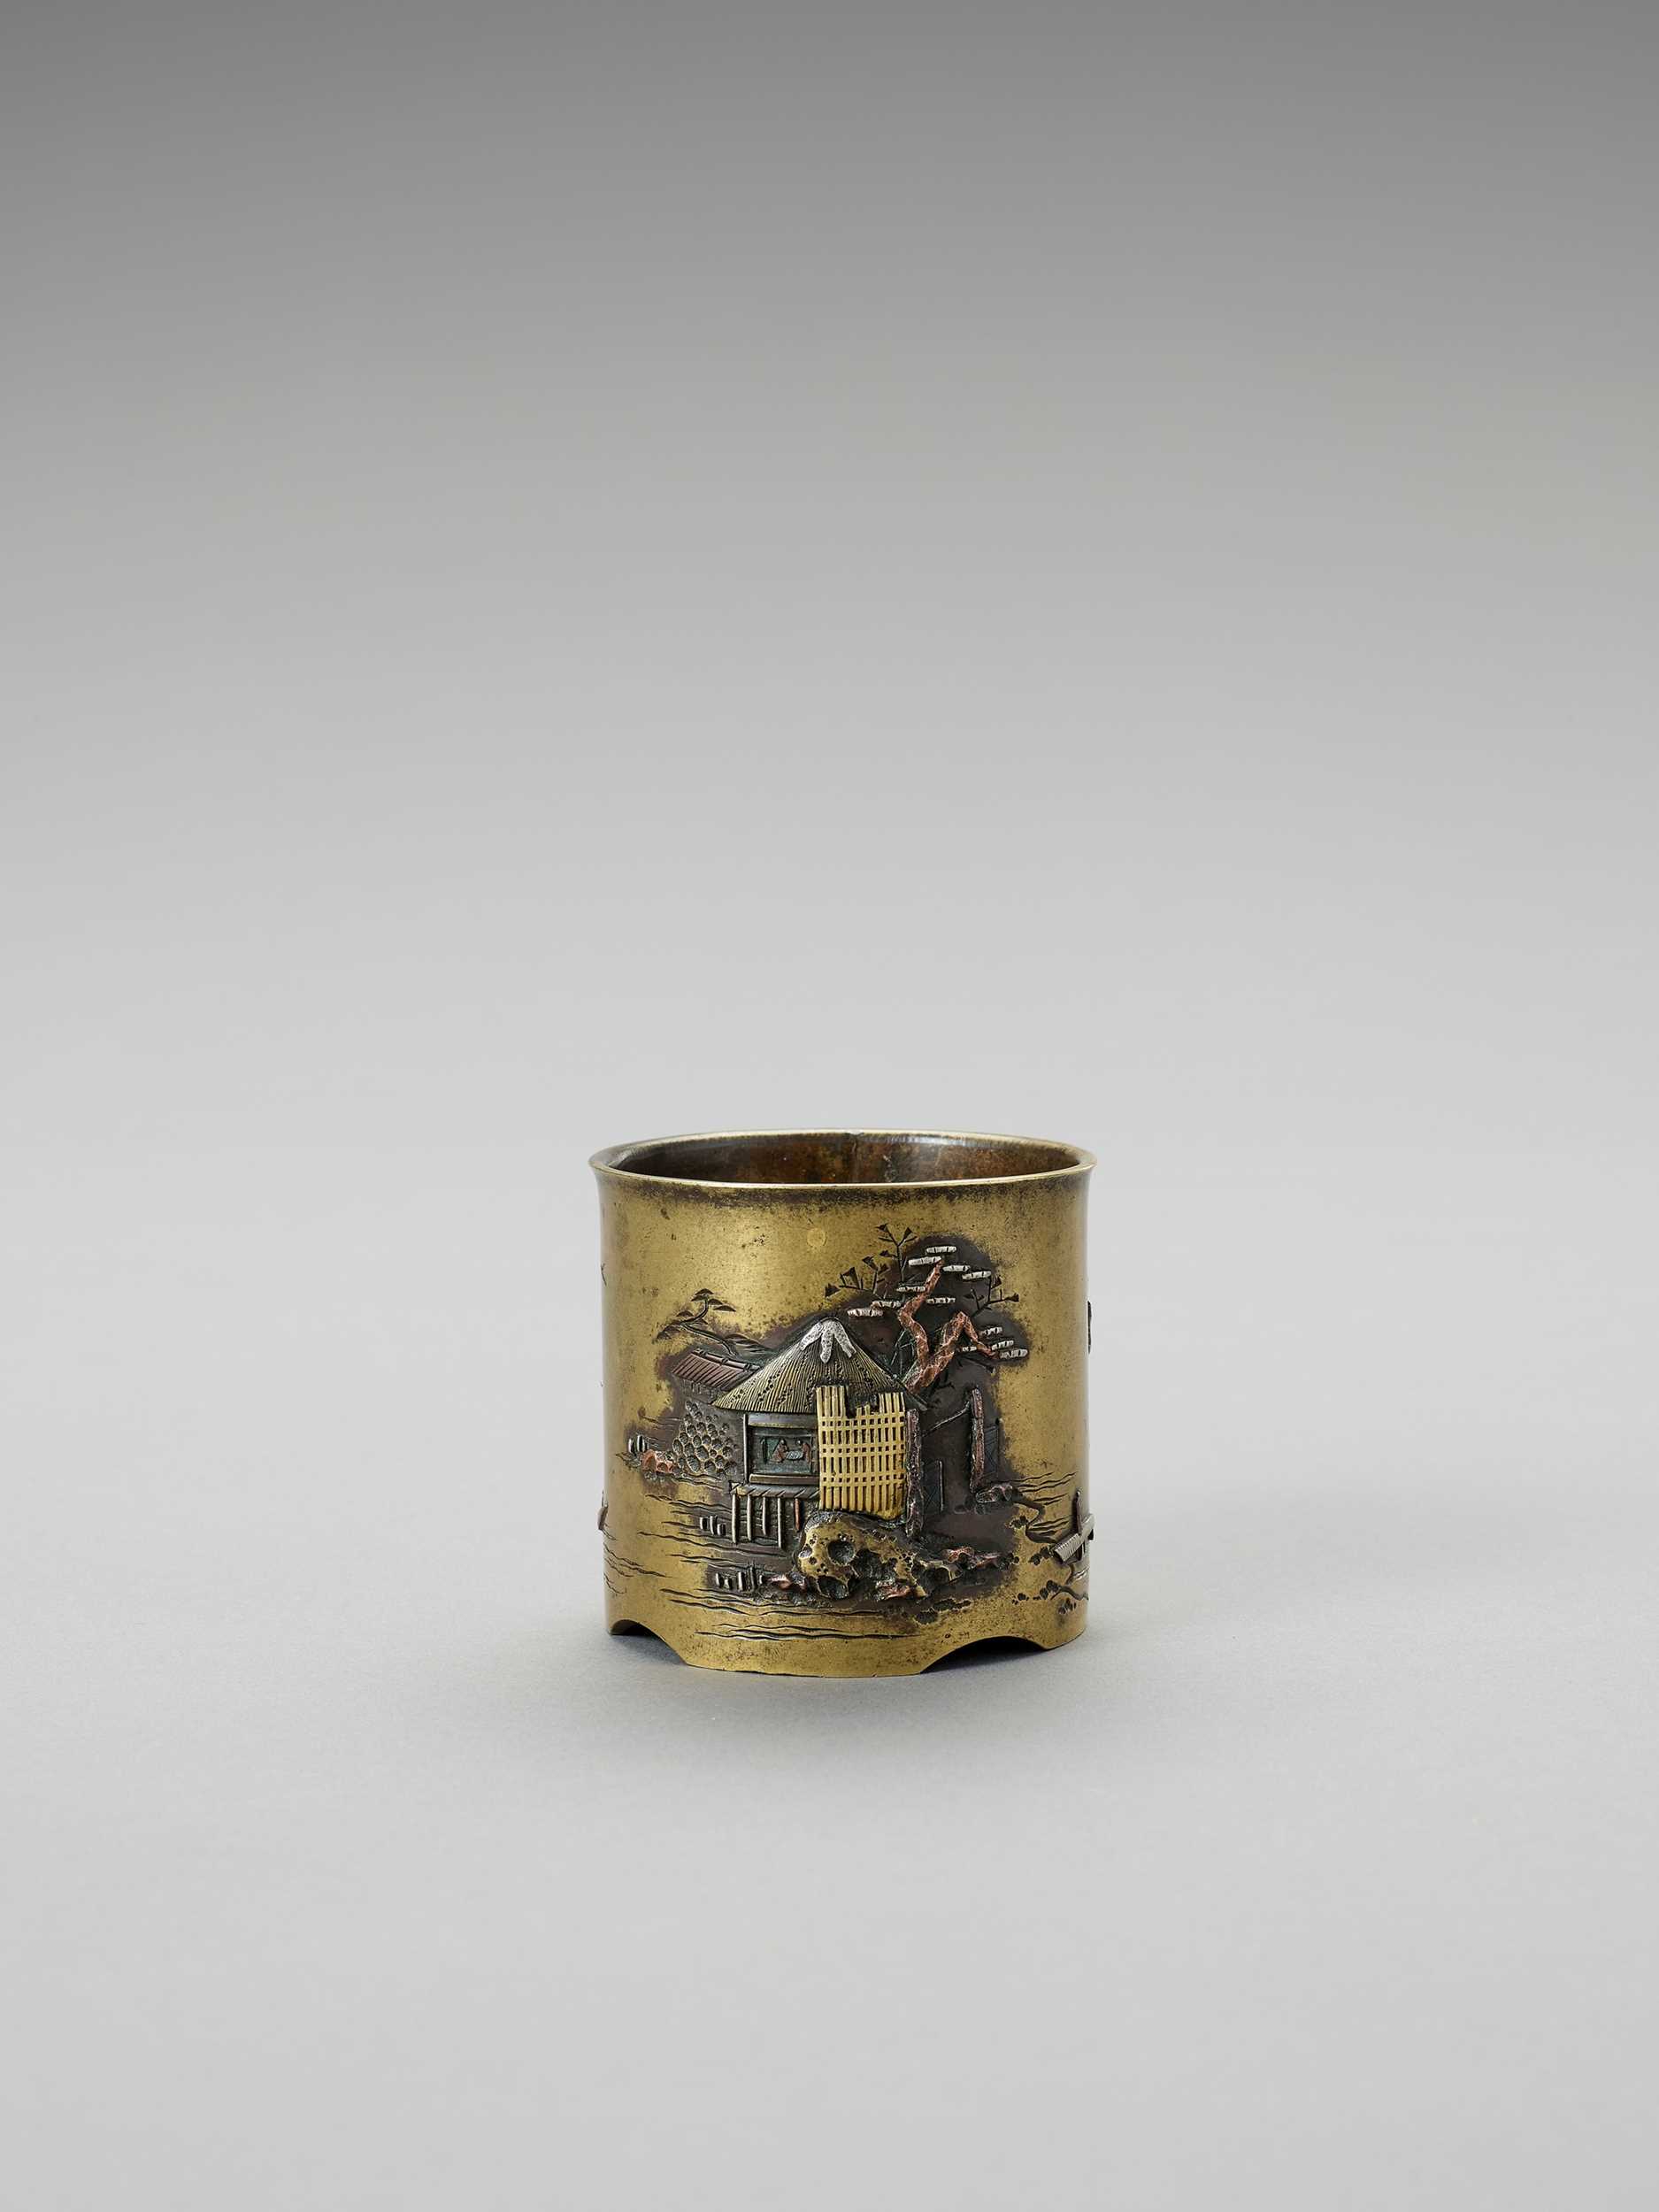 Lot 6 - A SMALL SENTOKU VESSEL WITH SILVER AND COPPER INLAYS